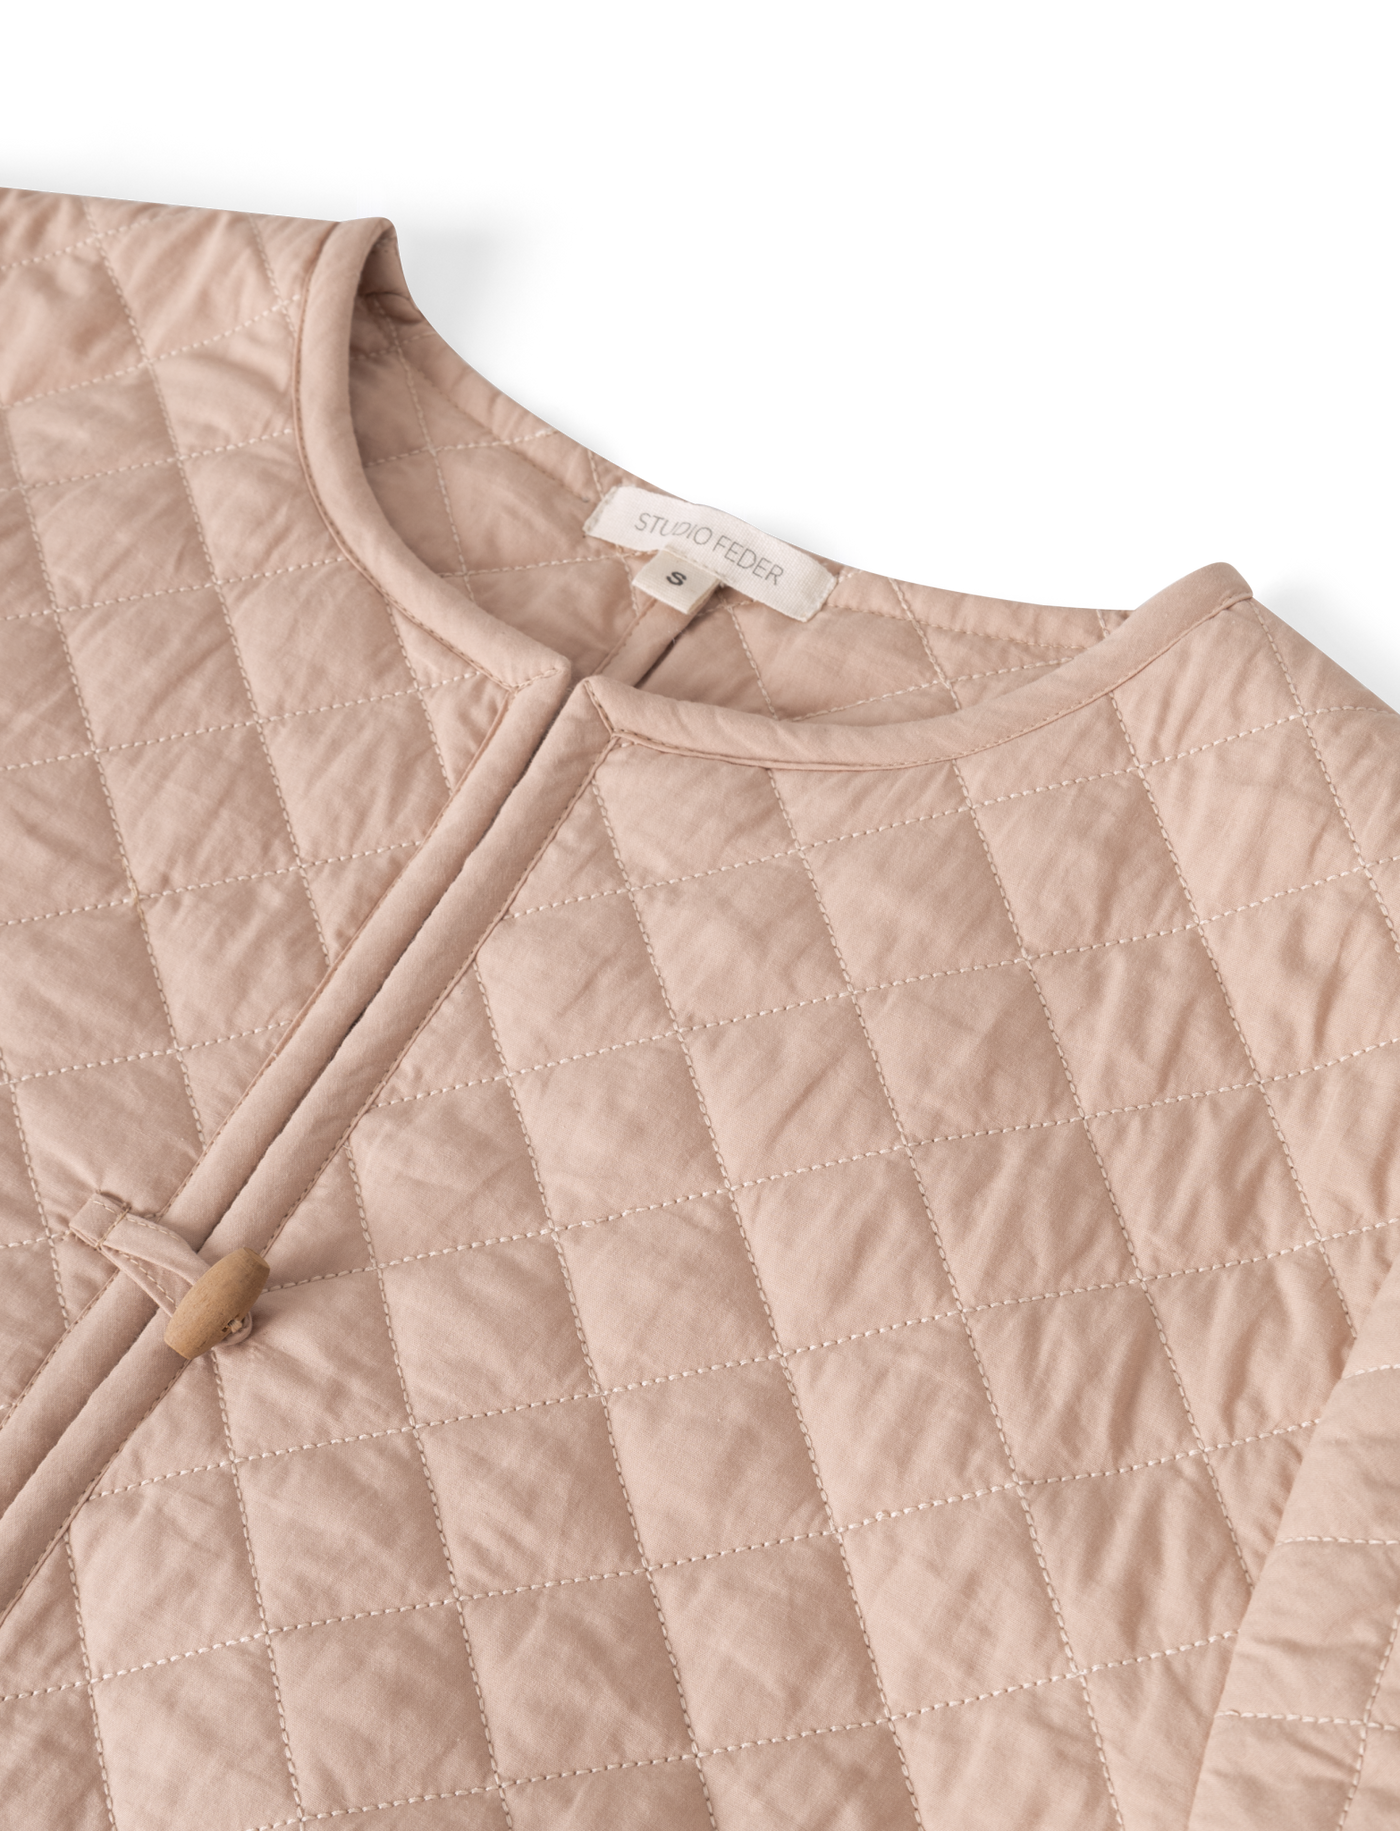 Lulu Quilted Jacket - Soft Rose